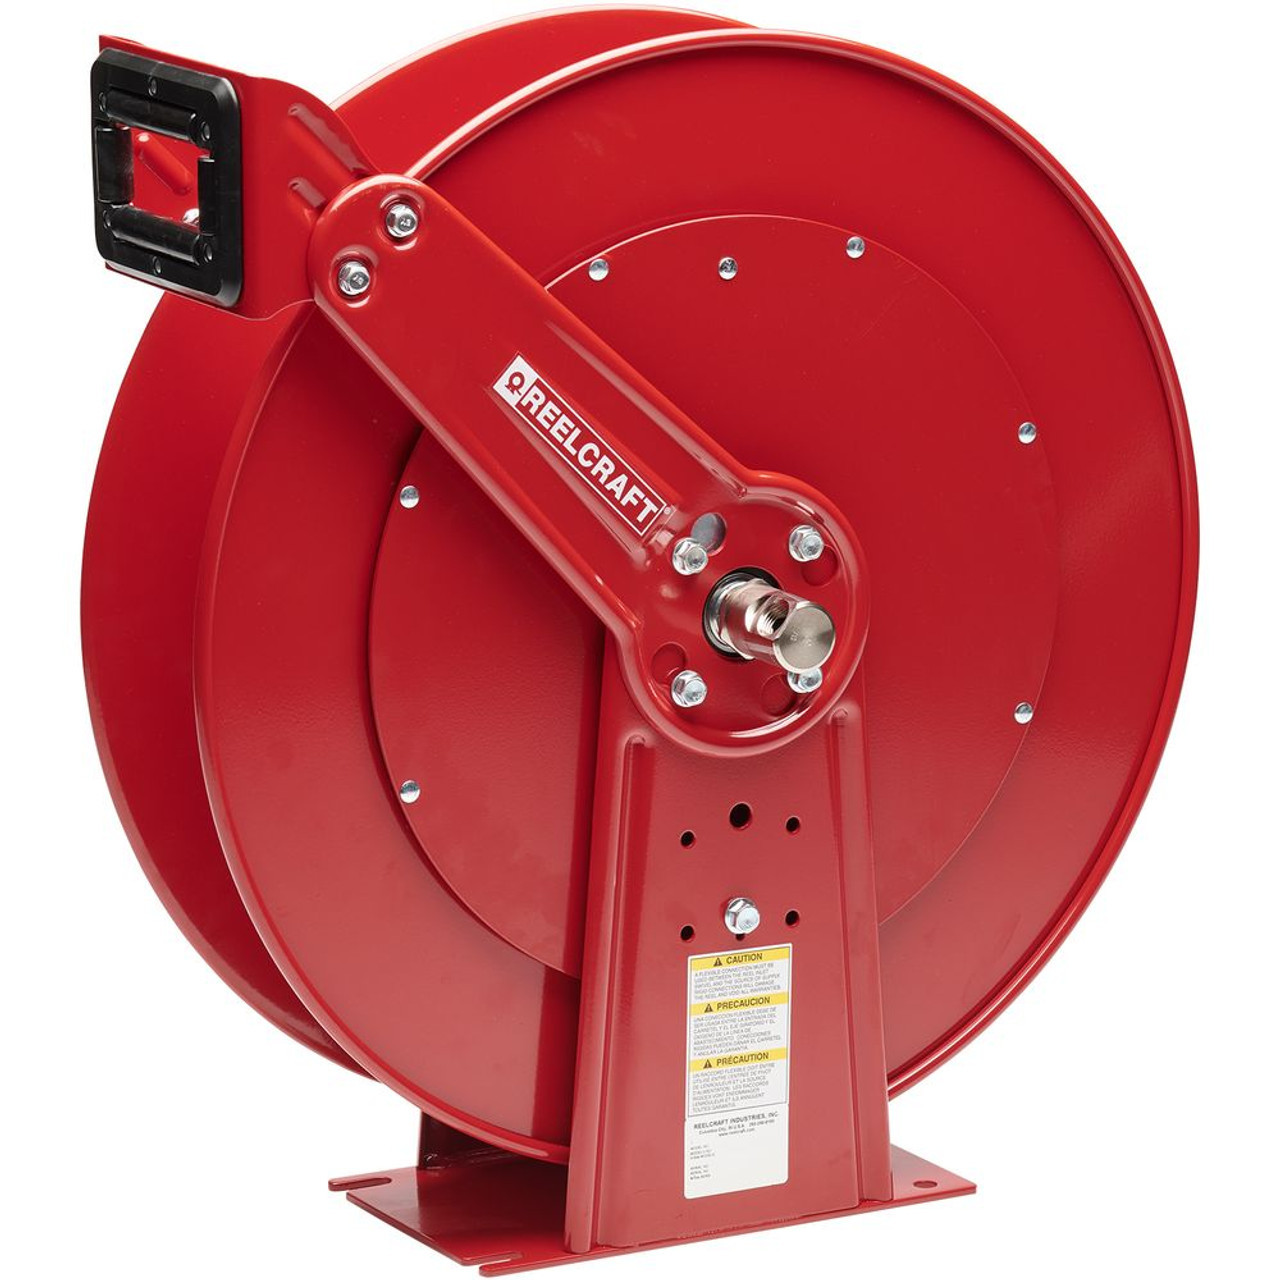 Reelcraft PW81000 Ohp 3/8x100' 5000 PSI Spring Retractable Pressure Wash Hose Reel